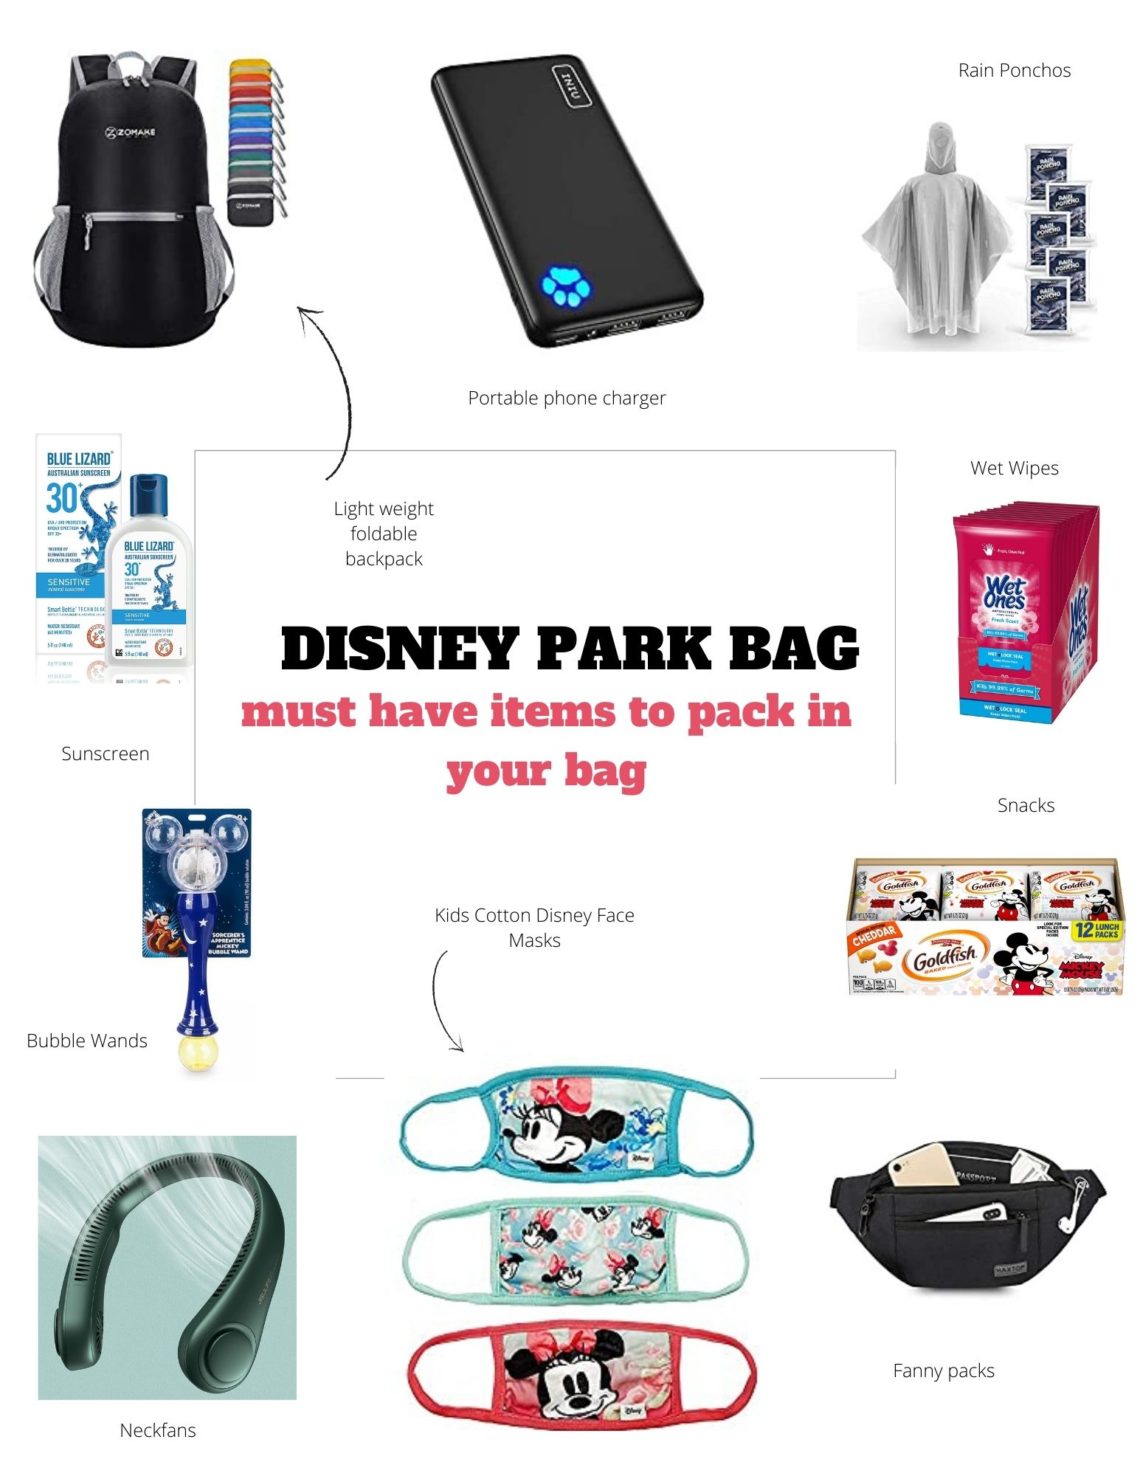 Disney Park Bag what to pack